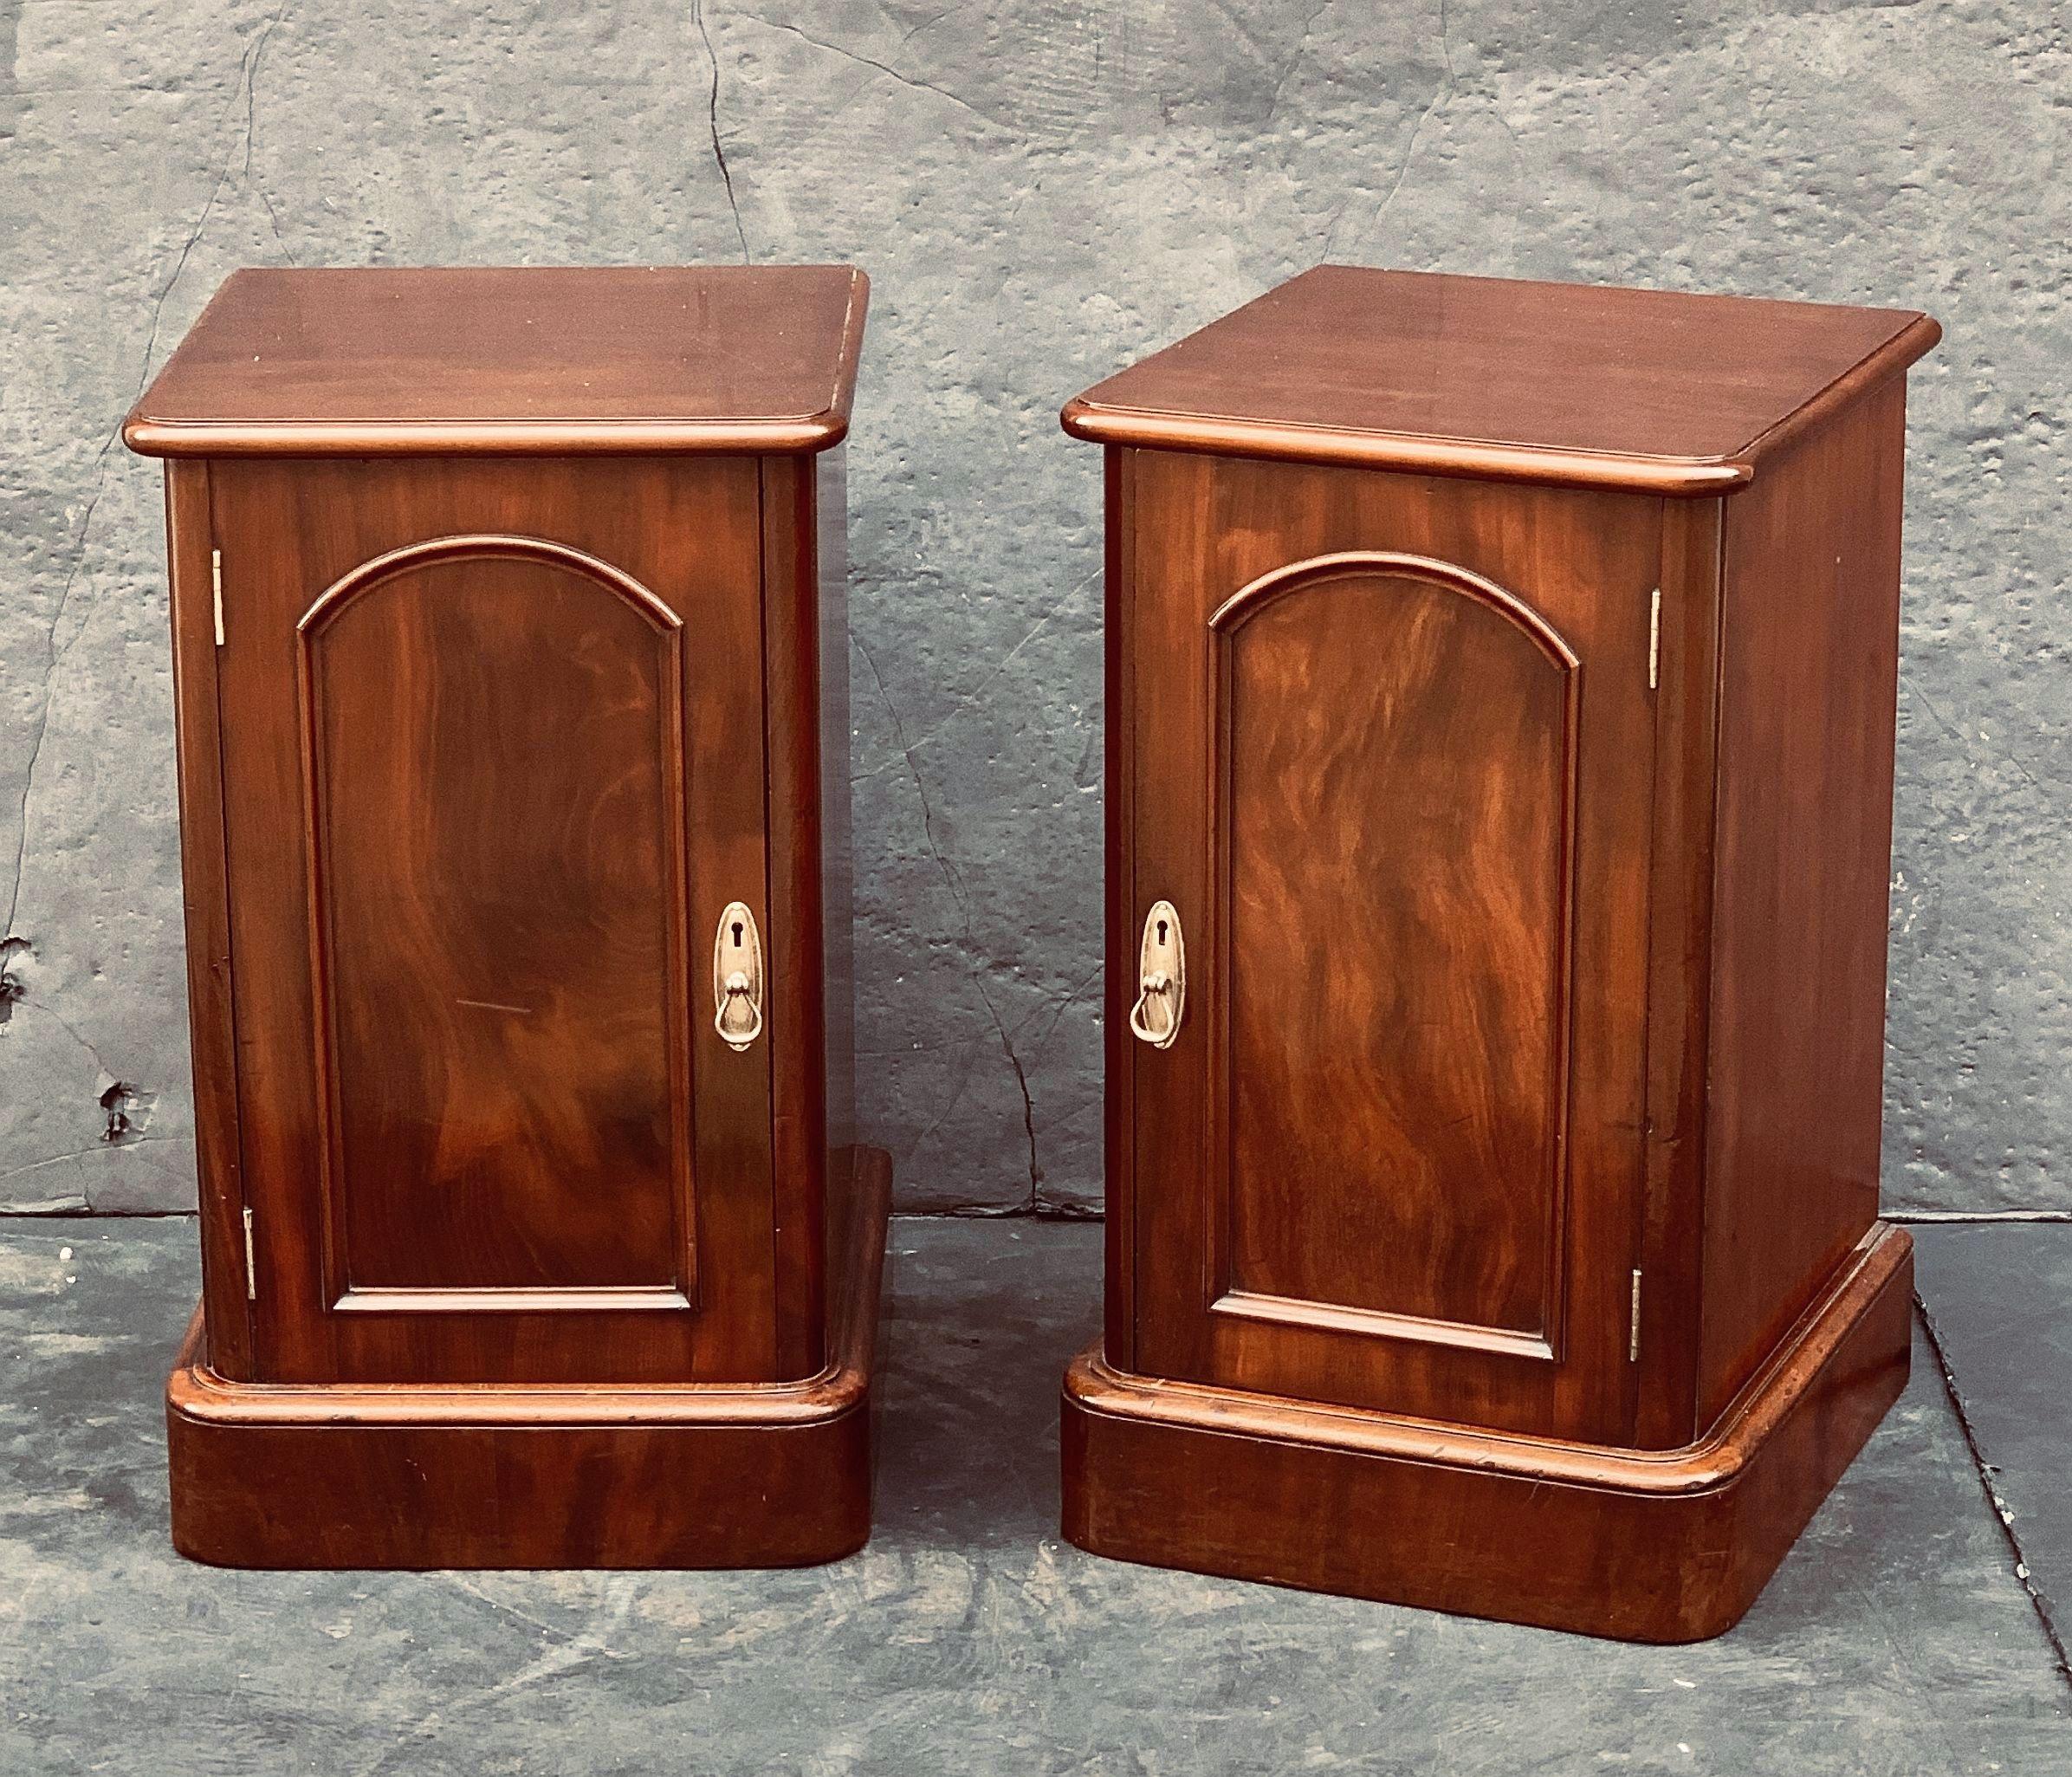 A handsome pair of English bedside chests or cabinet nightstands of mahogany - each chest with a moulded top over a cabinet door with brass escutcheon, opening to a cupboard with drawer and two shelves, set upon a plinth base.

Priced as a pair -